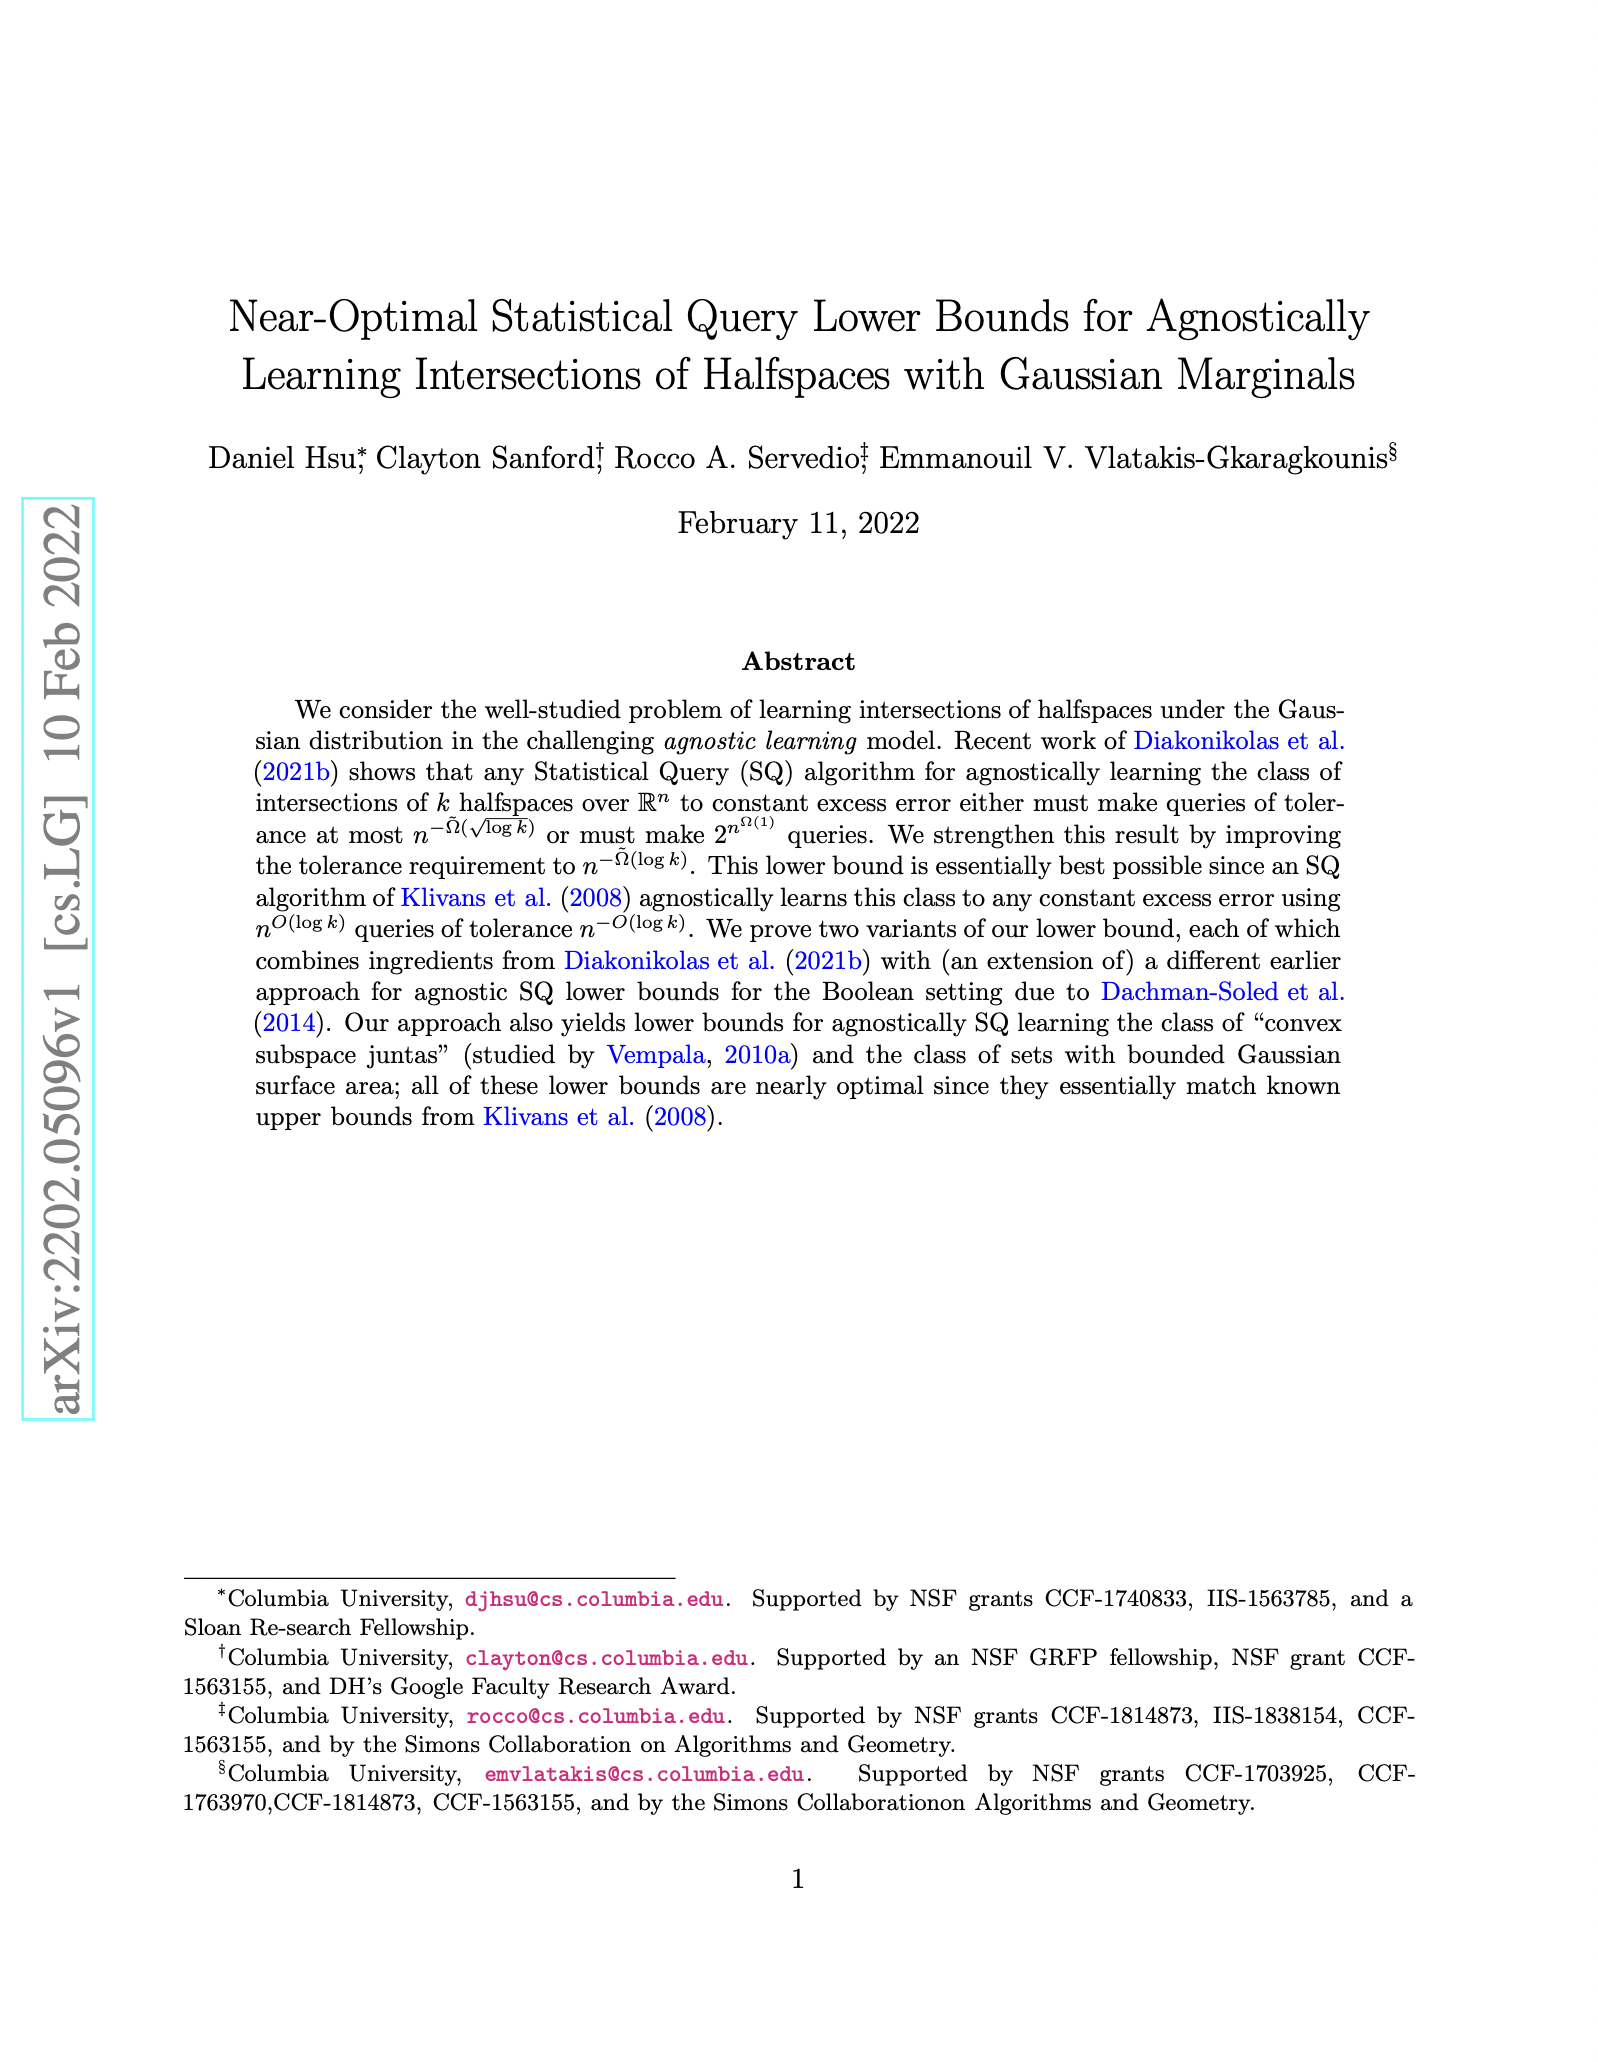 Near-Optimal Statistical Query Lower Bounds